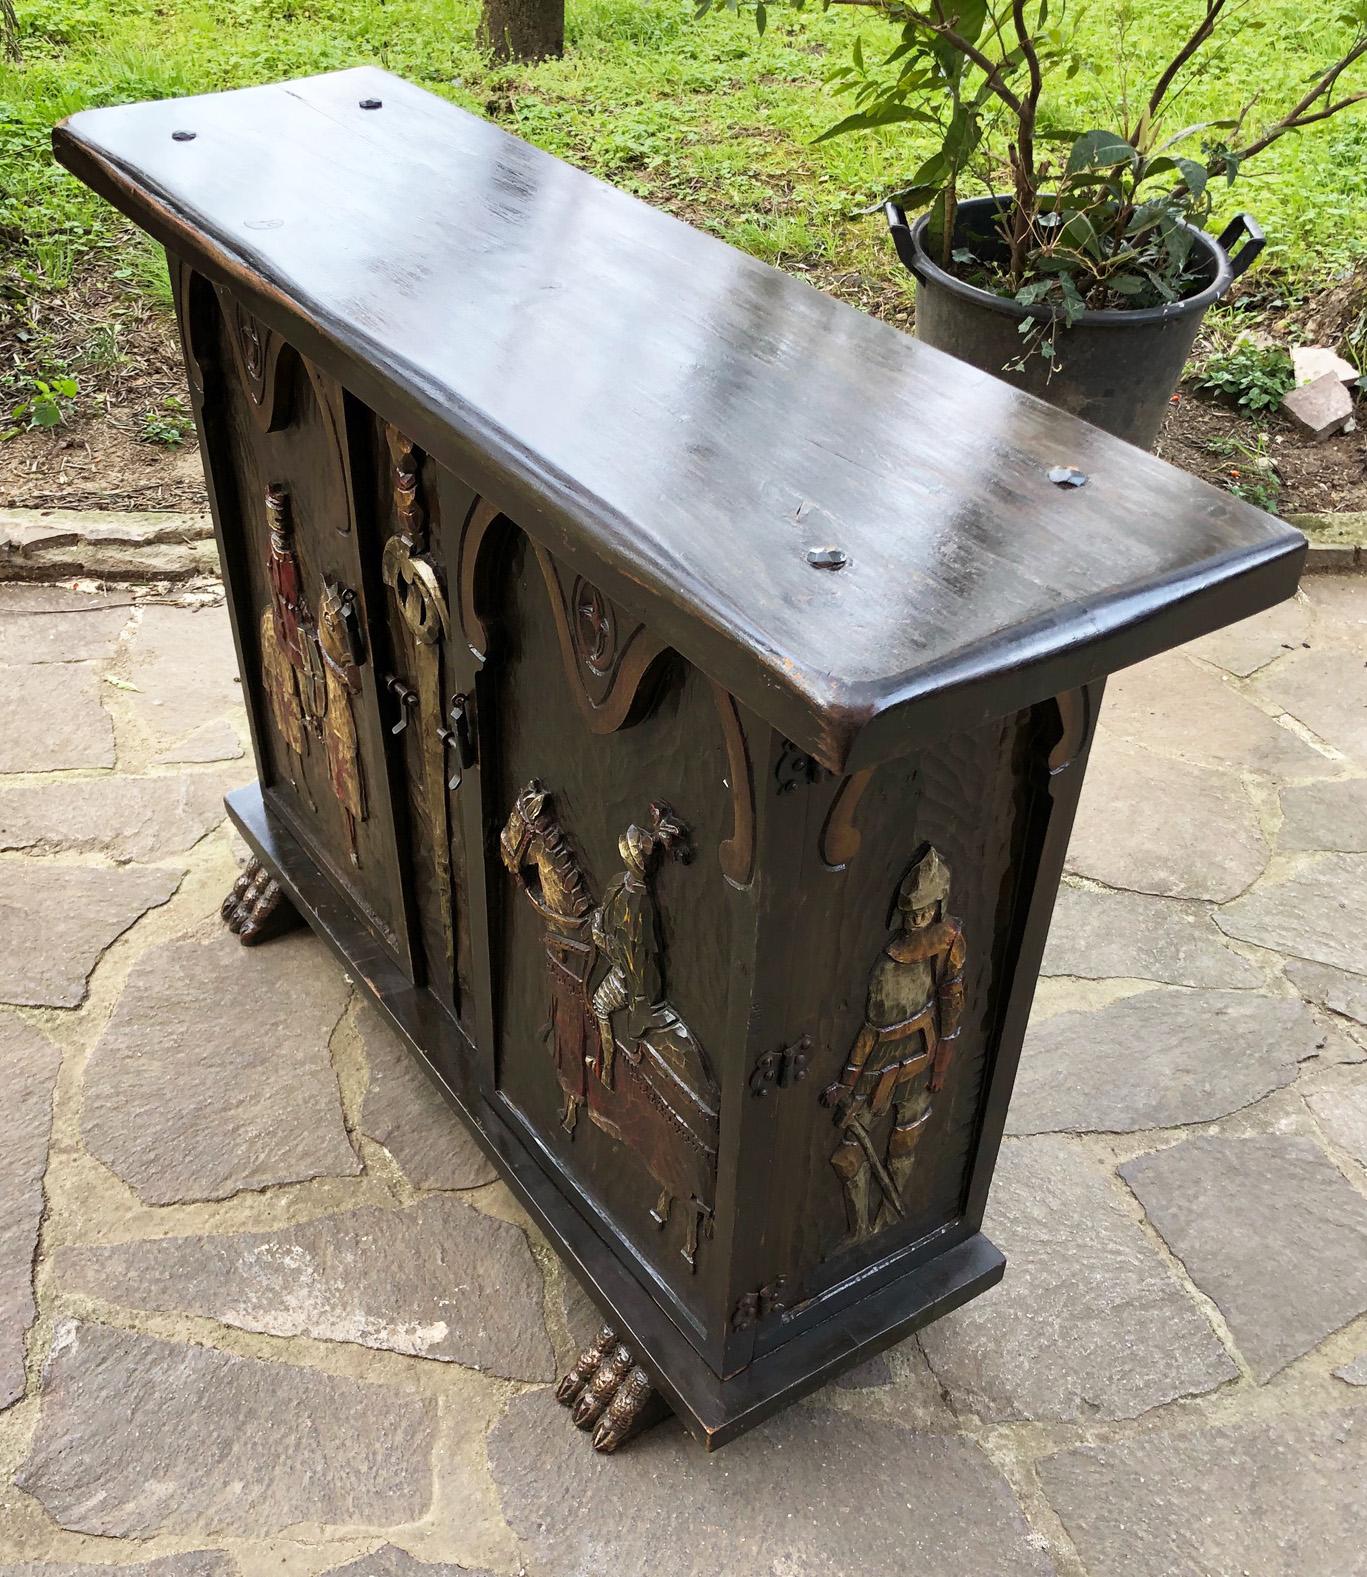 Italian sideboard from 1960, in fir, hand-carved, painted, with two doors.
Dark brown color.
The sideboard has been completely restored, everything is in working order. 
The finish is shellac and wax. 
Comes from an old country house in the